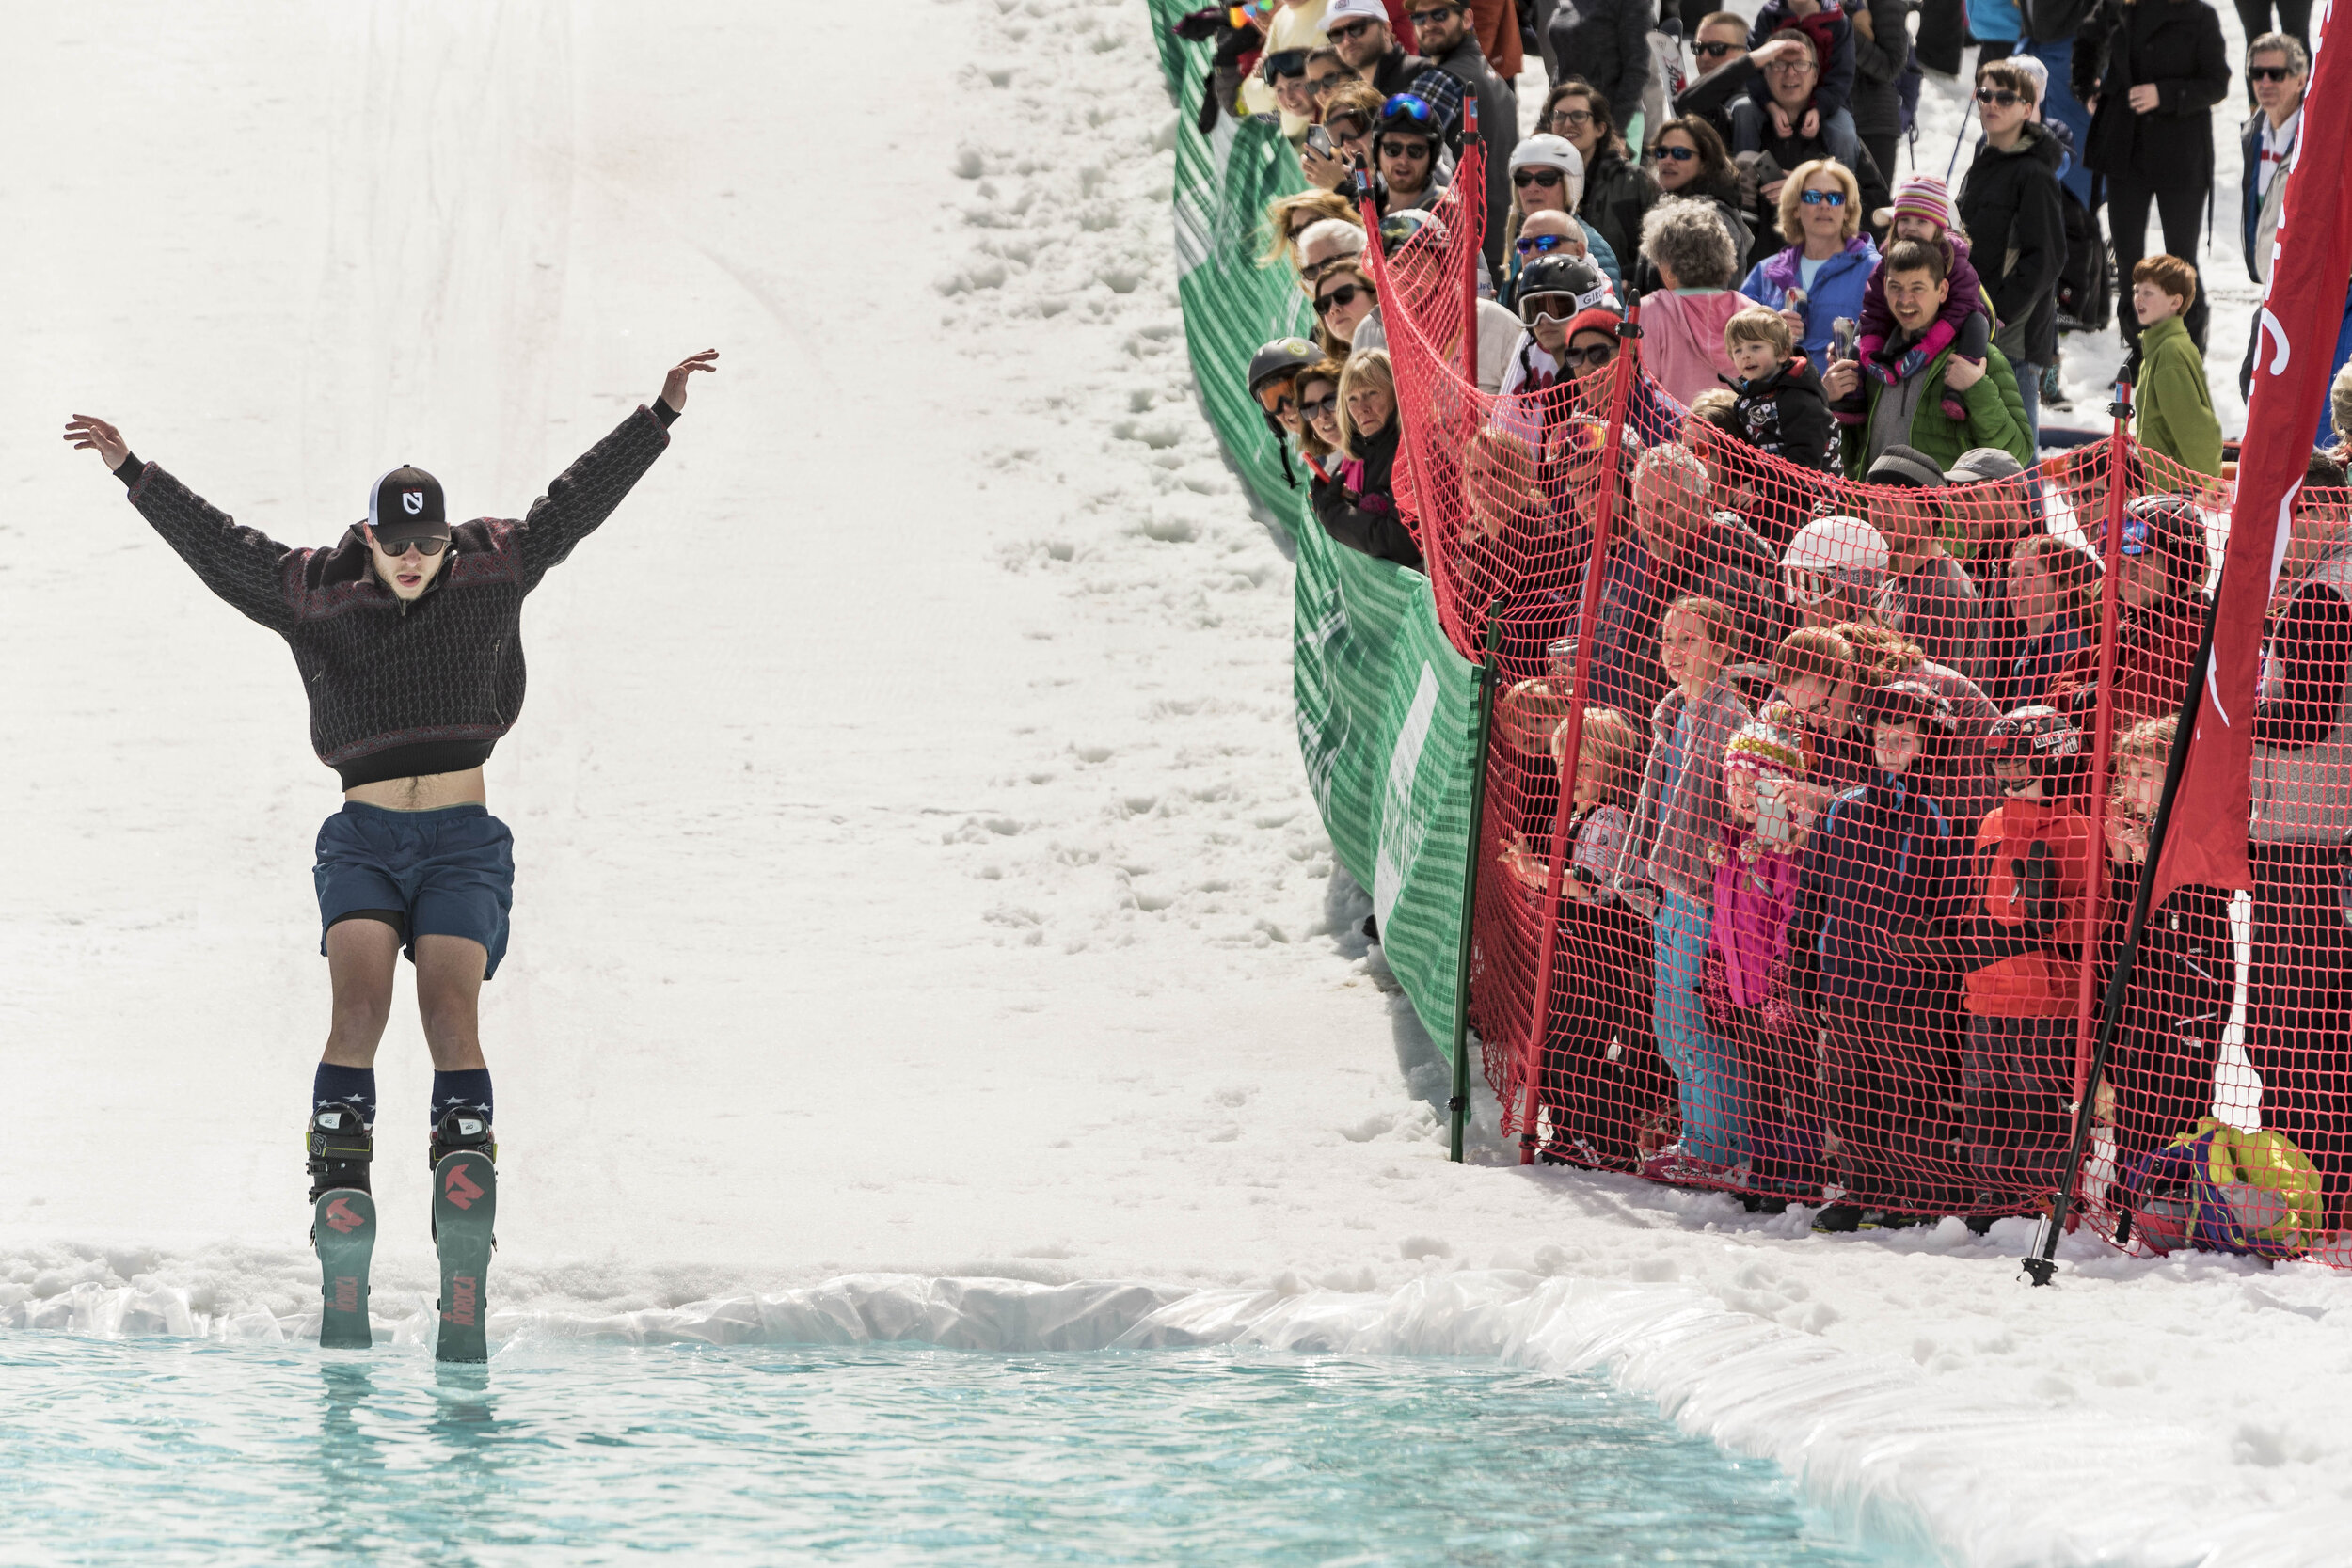  The crowd watches on during Sugarbush's Pond Skimming competition on Saturday, April 6th 2019 in Warren, VT.  